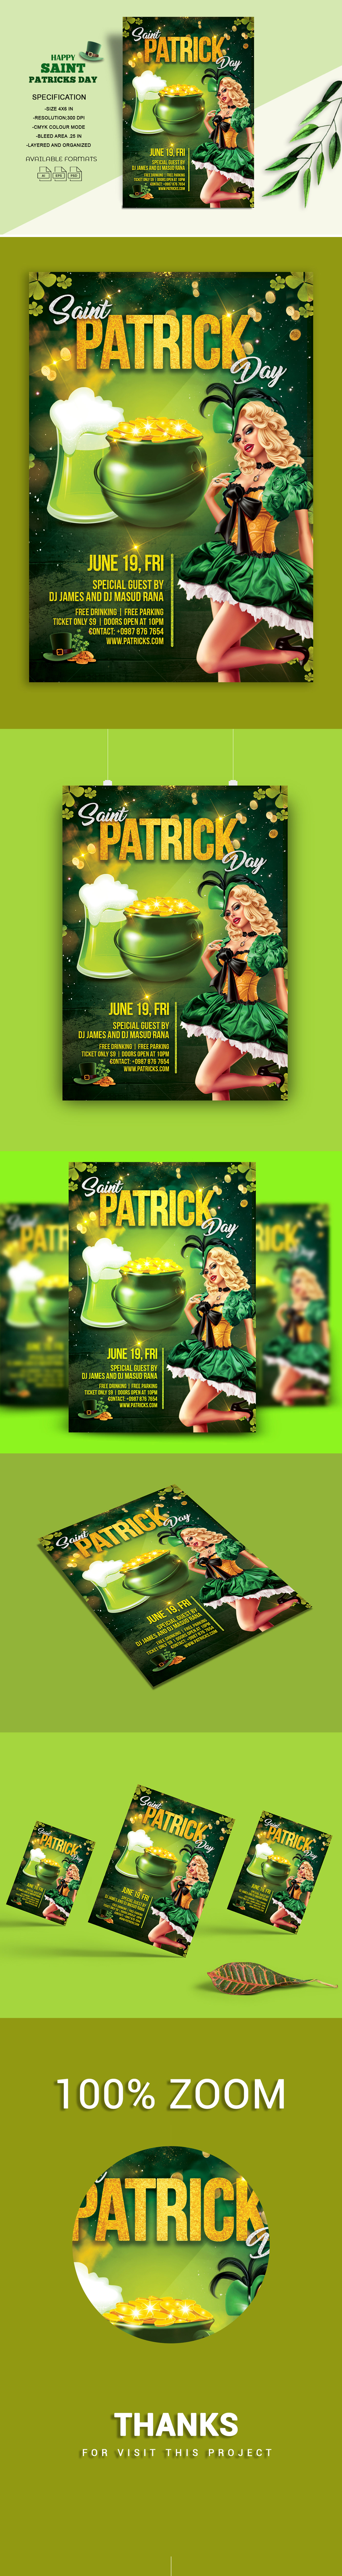 christmas flyer Event event flyer Flyer Design music flyer night party party flyer sports sports flyer St Patricks Day